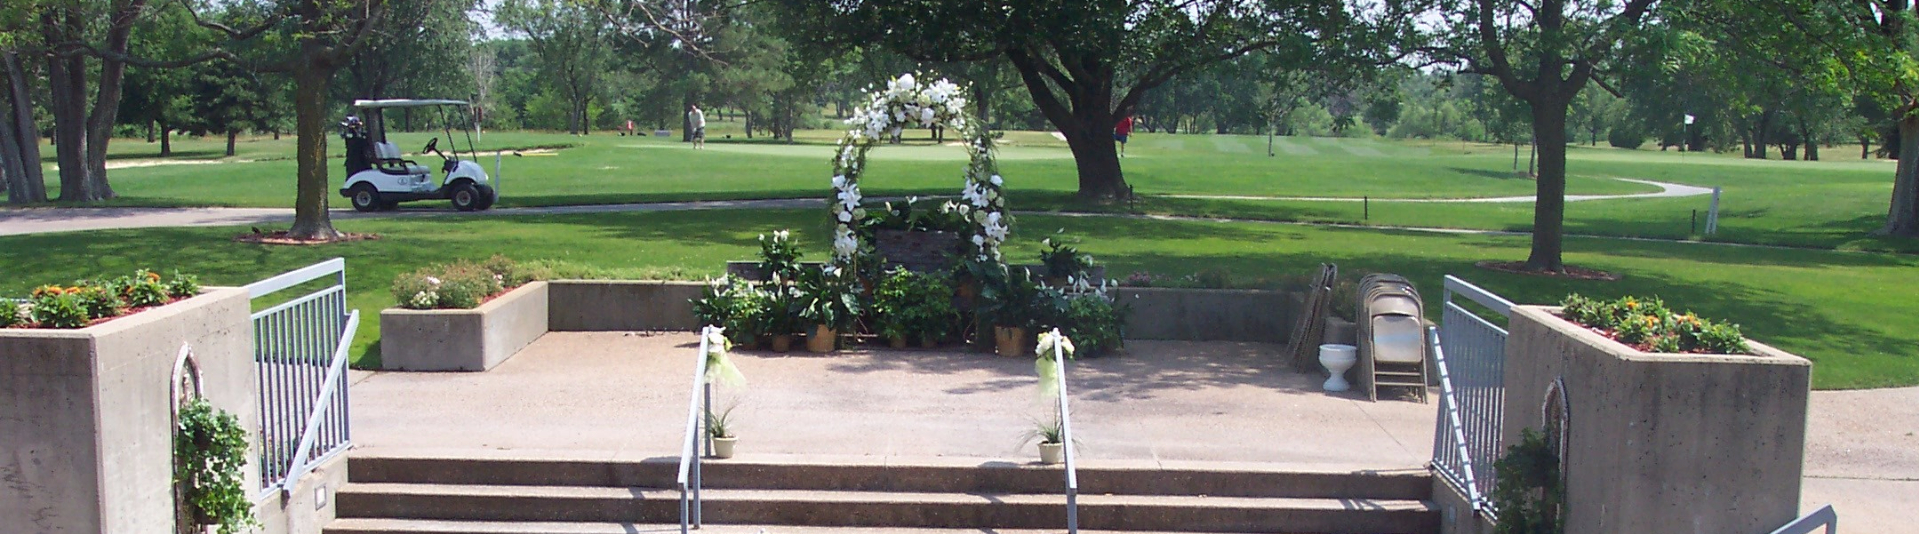 Concrete stairs leading up to the golf course view with a ceremony garland with white flowers in centerframe 